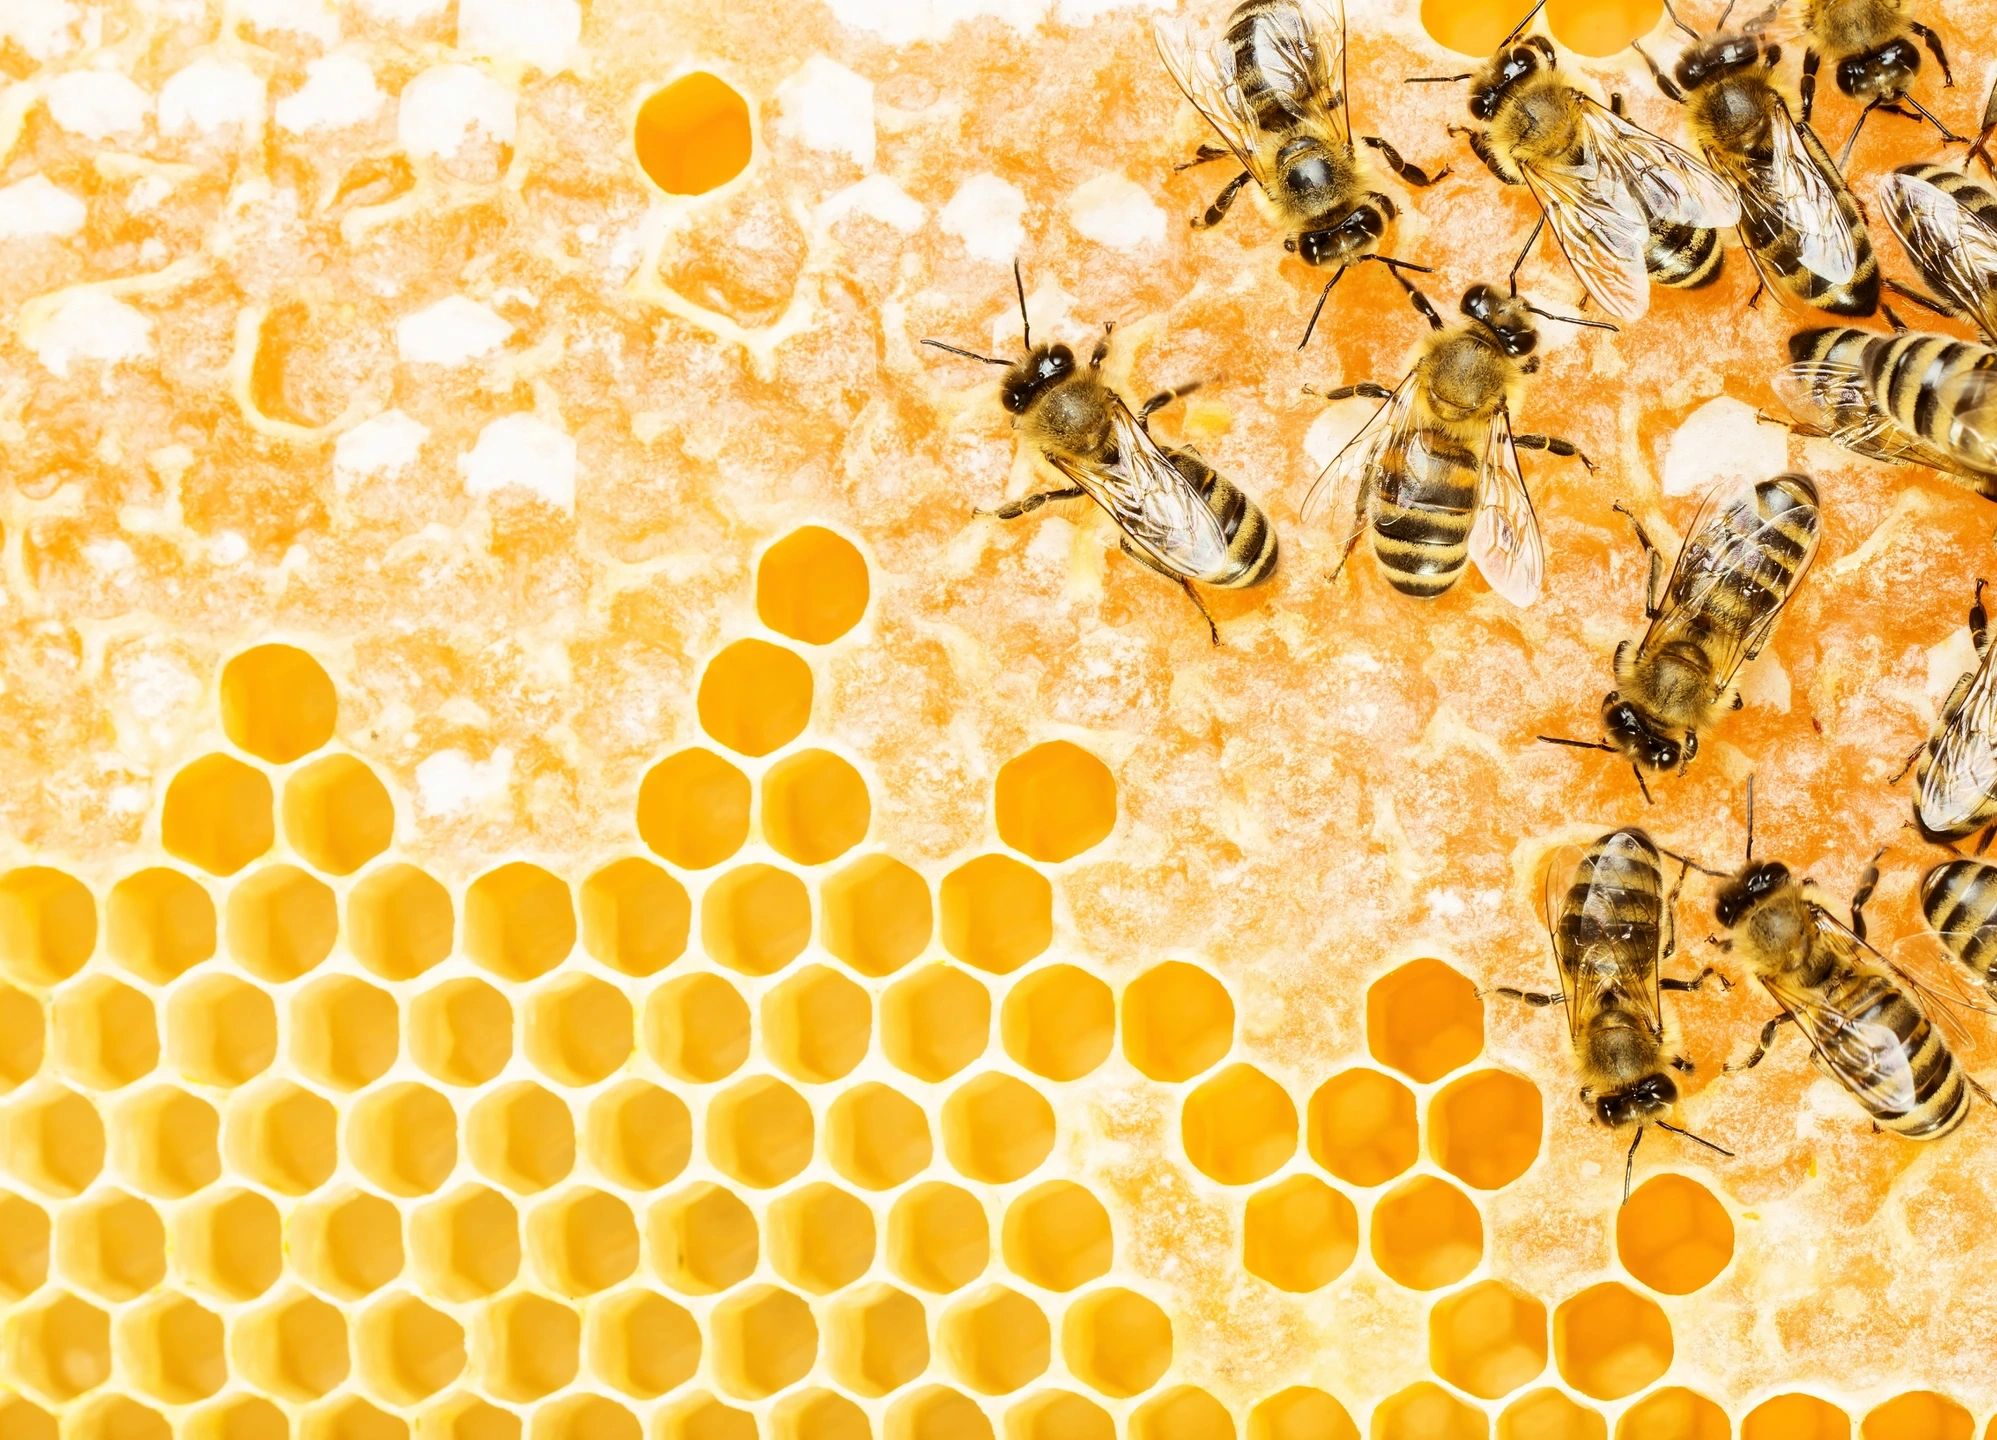 Bees on partially filled honeycomb. Antioxidant Boost Found in Citrus Honey.